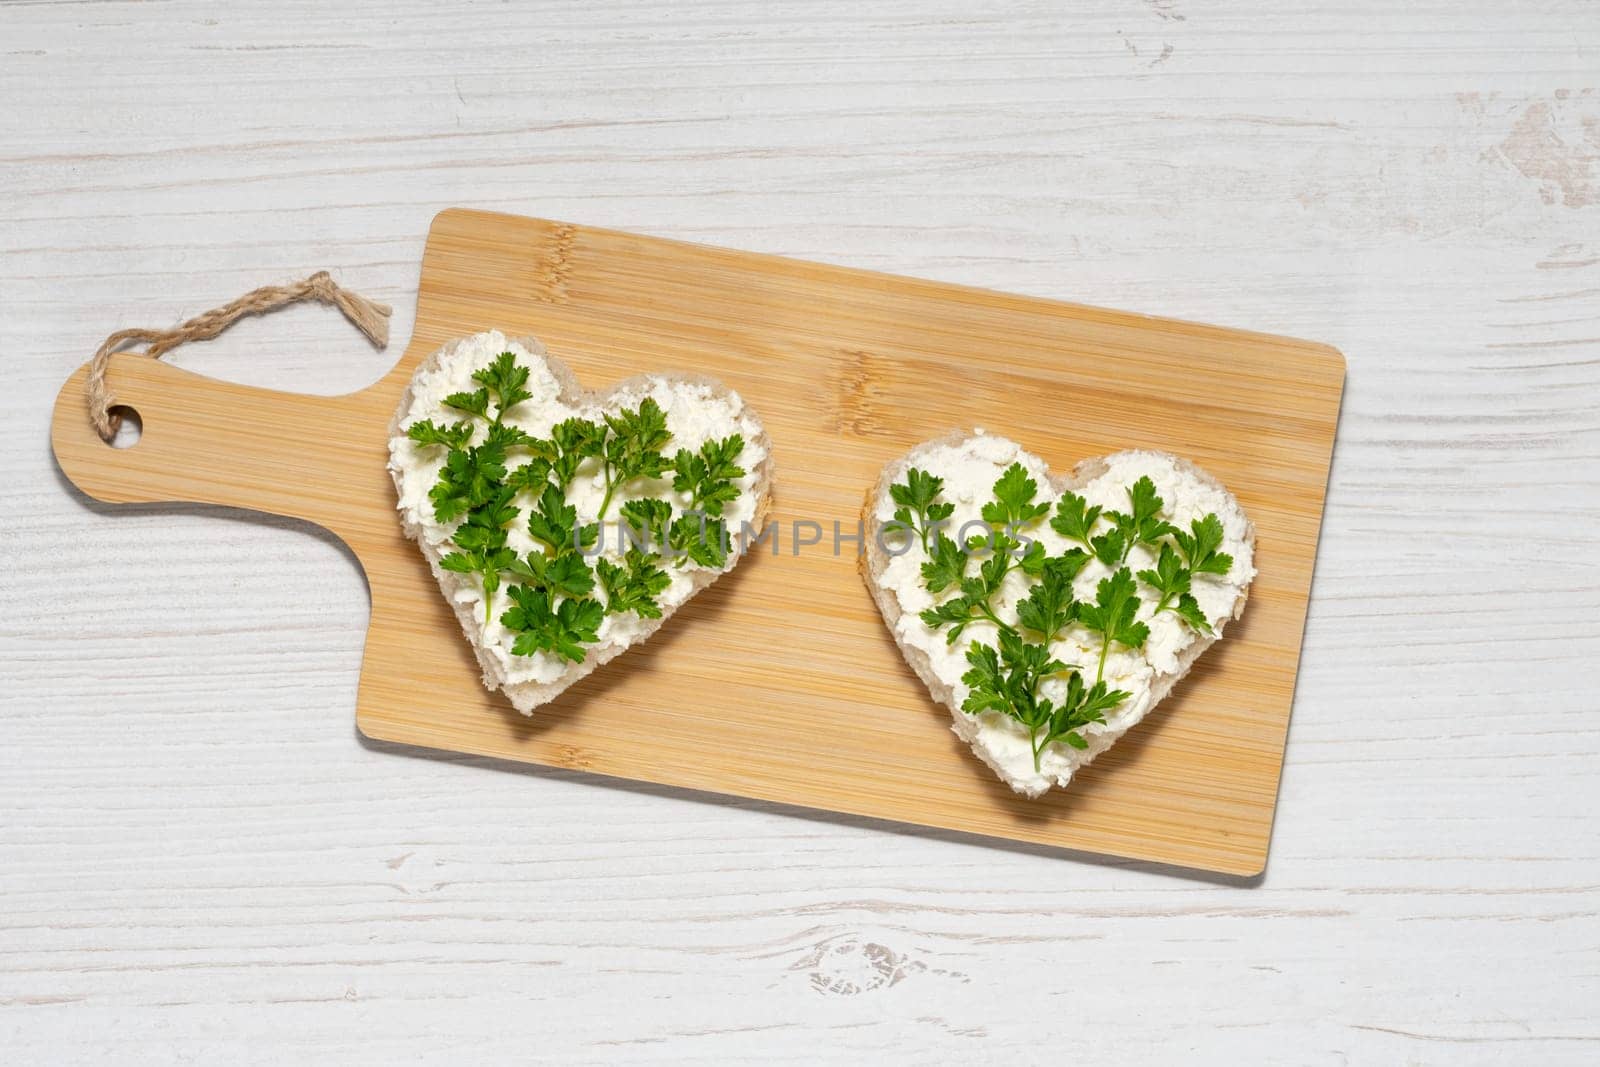 Two heart-shaped sandwiches with cottage cheese and parsley by NataliPopova